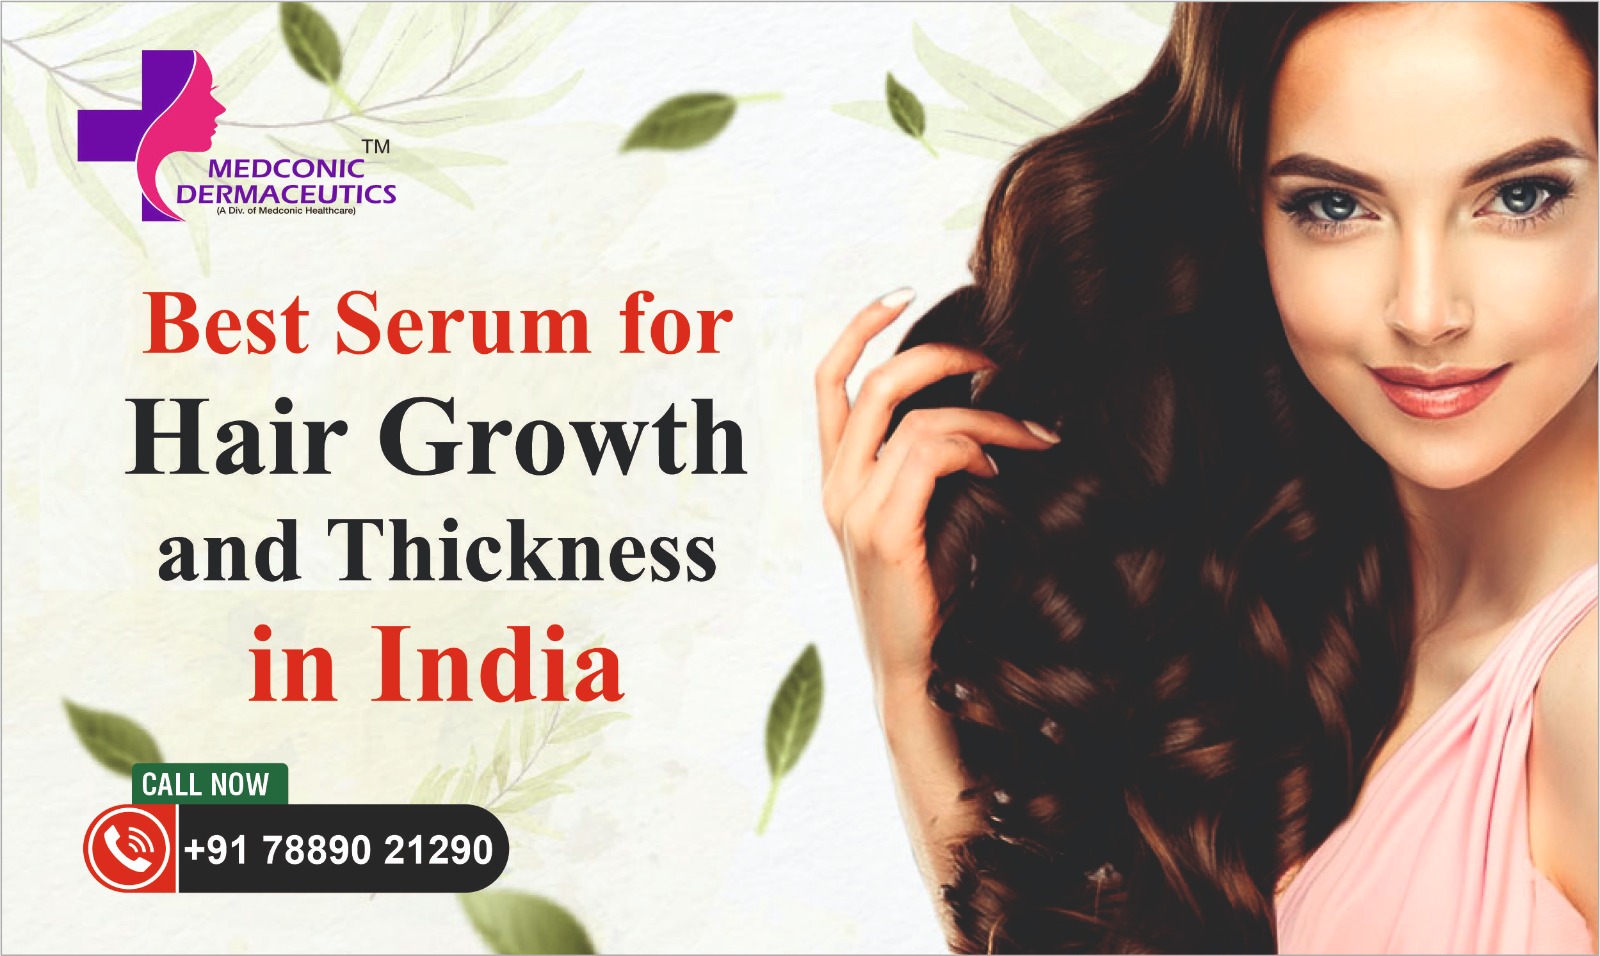 Best Serum for Hair Growth and Thickness in India